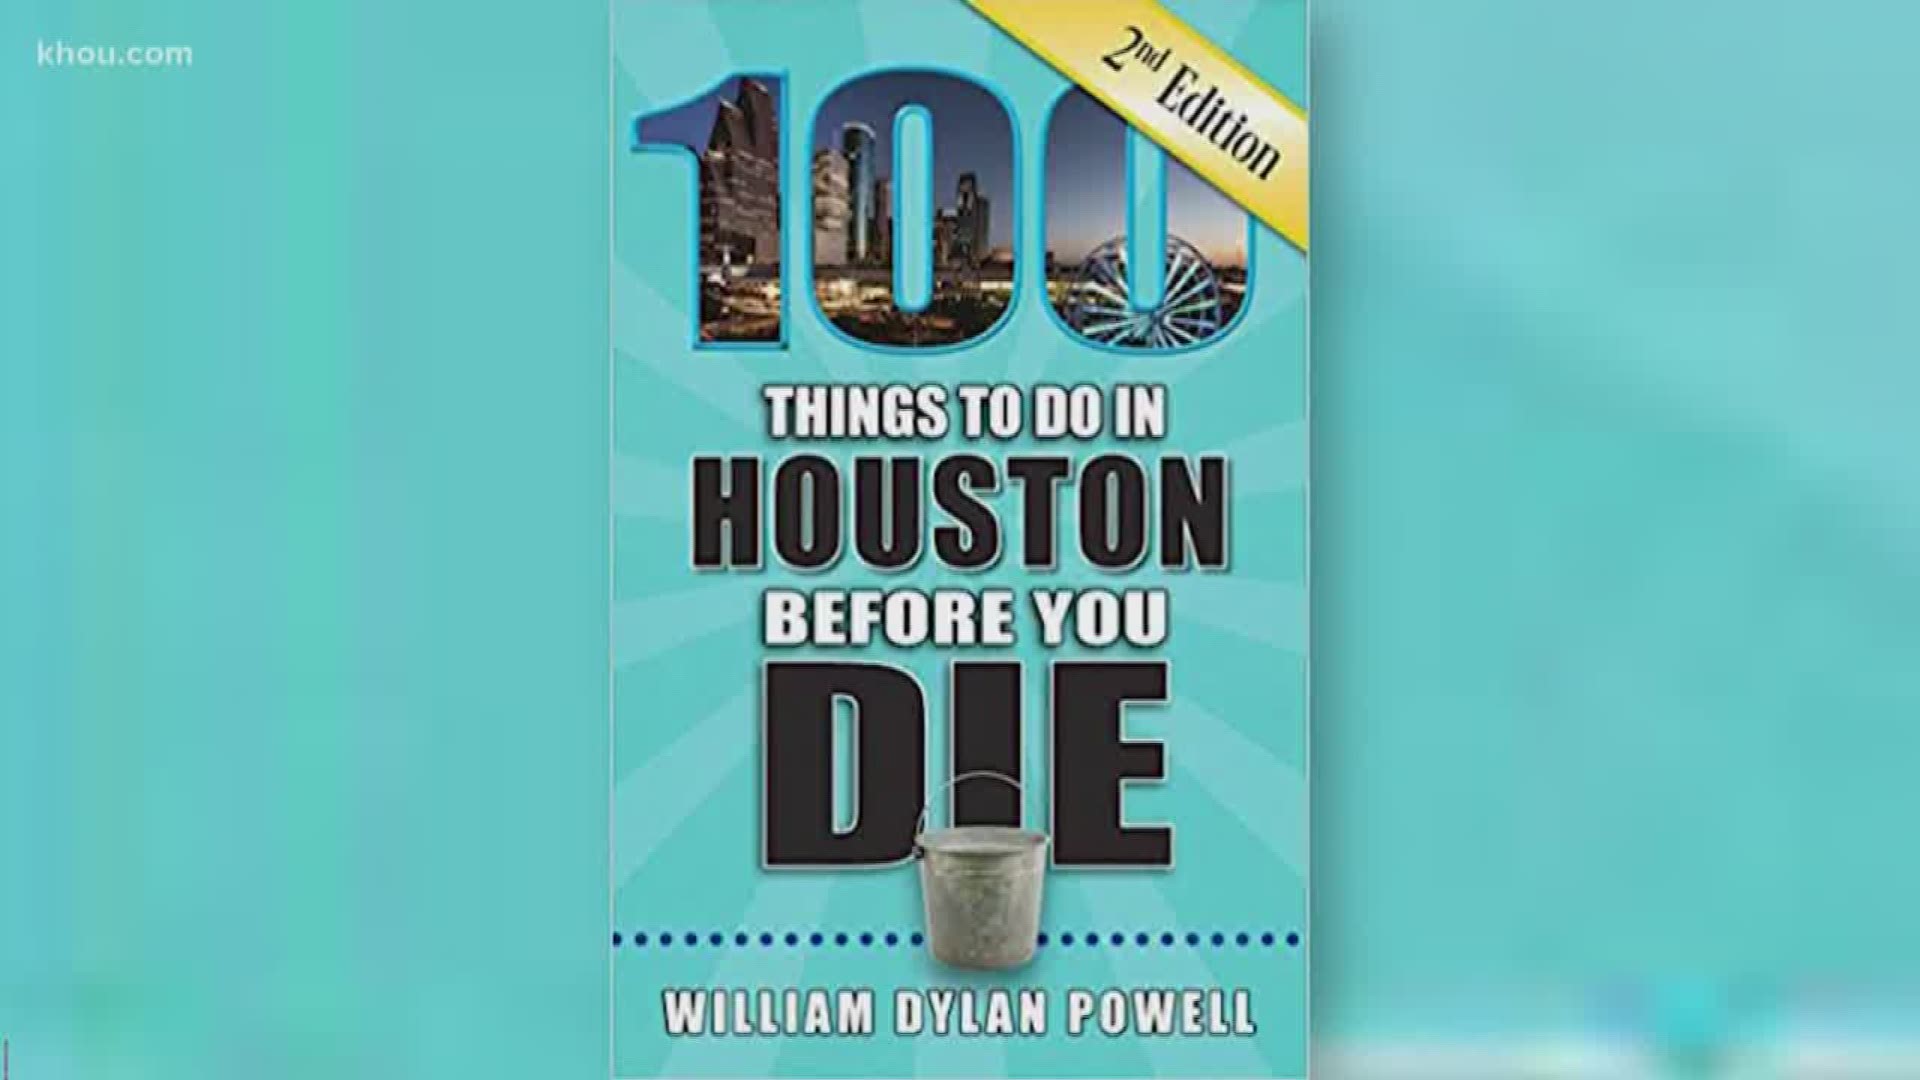 KHOU 11 talked to Author William Dylan Powell who wrote the book "100 Things to Do in Houston Before You Die". You can purchase at the book on Amazon and Barnes & Noble.